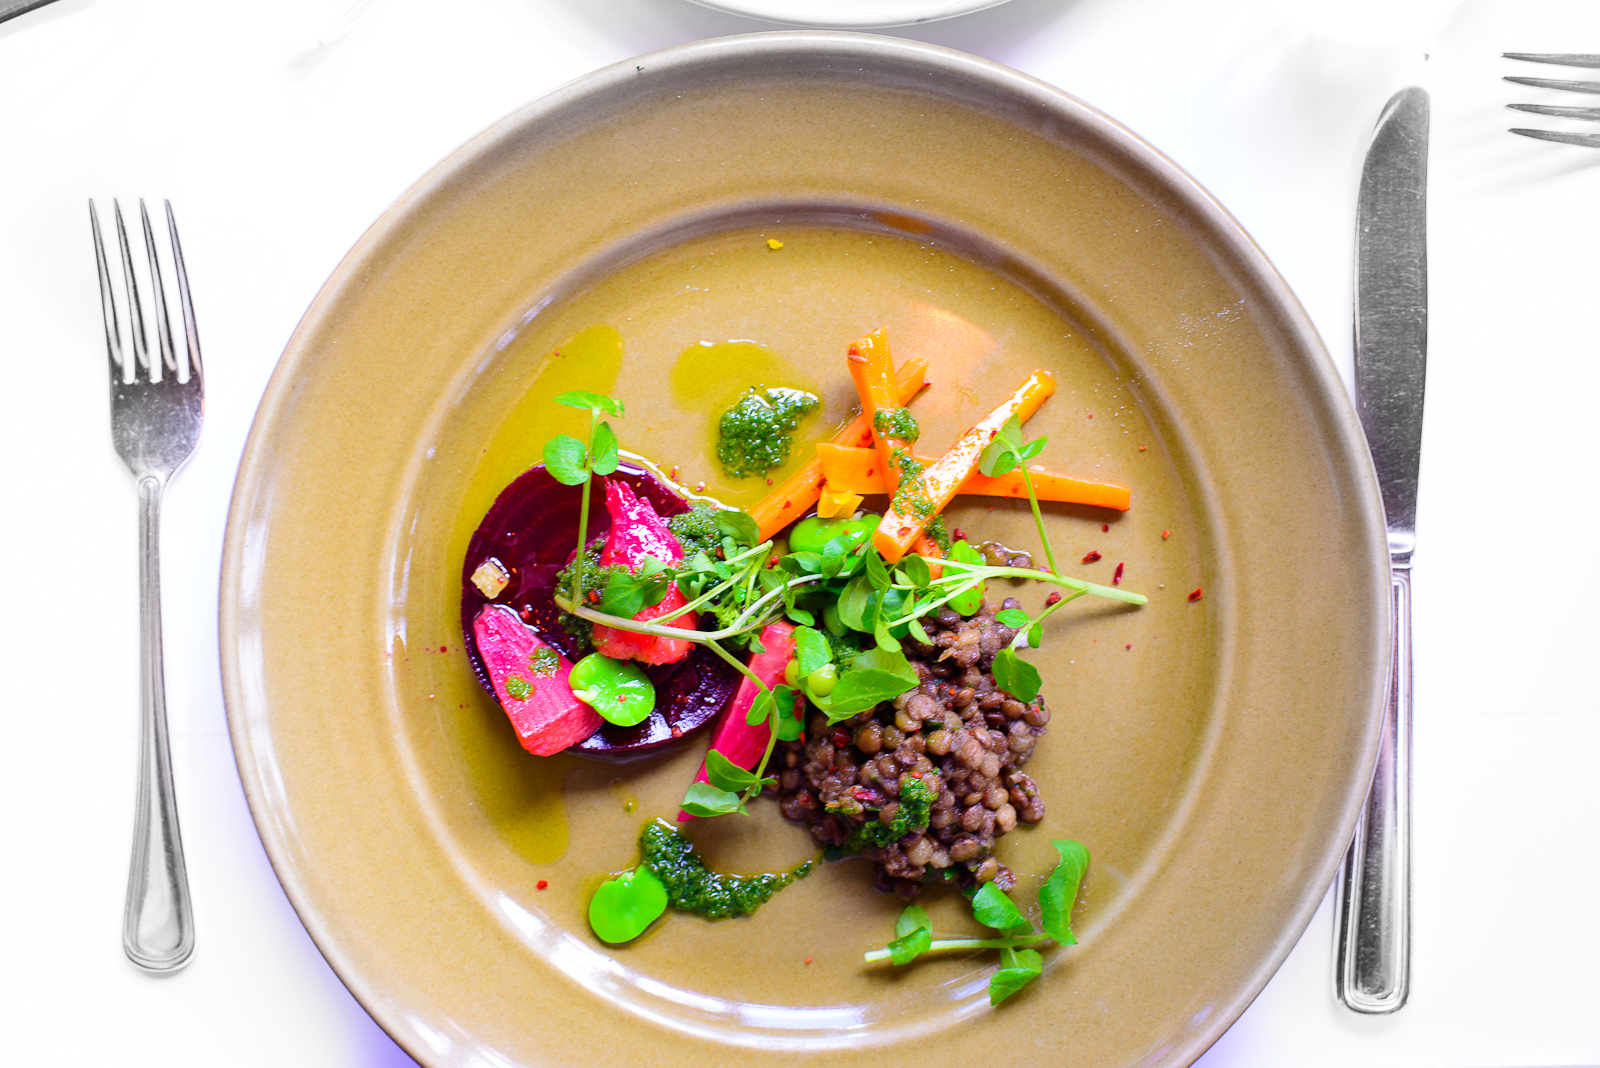 Lentils with preserved lemon, spicy carrots, and marinated beets